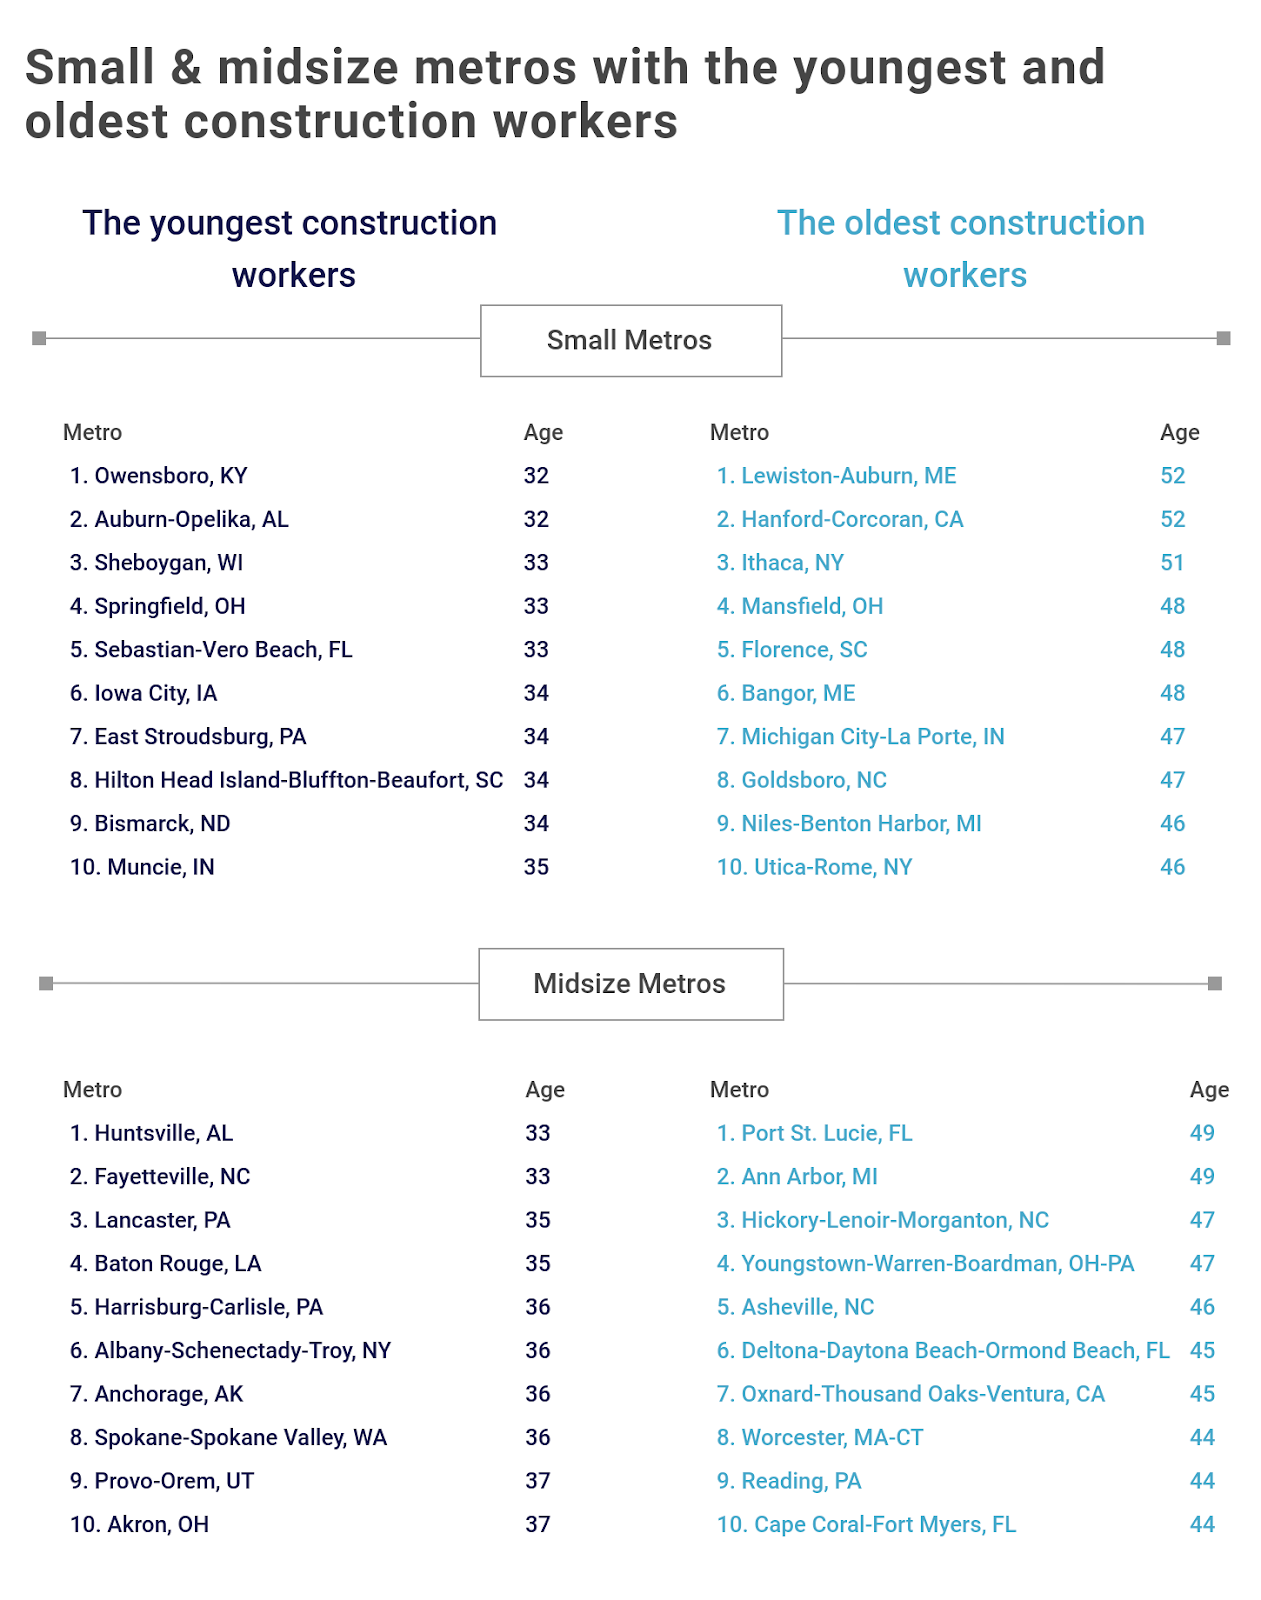 Chart3 Small and midsize metros with the youngest construction workers